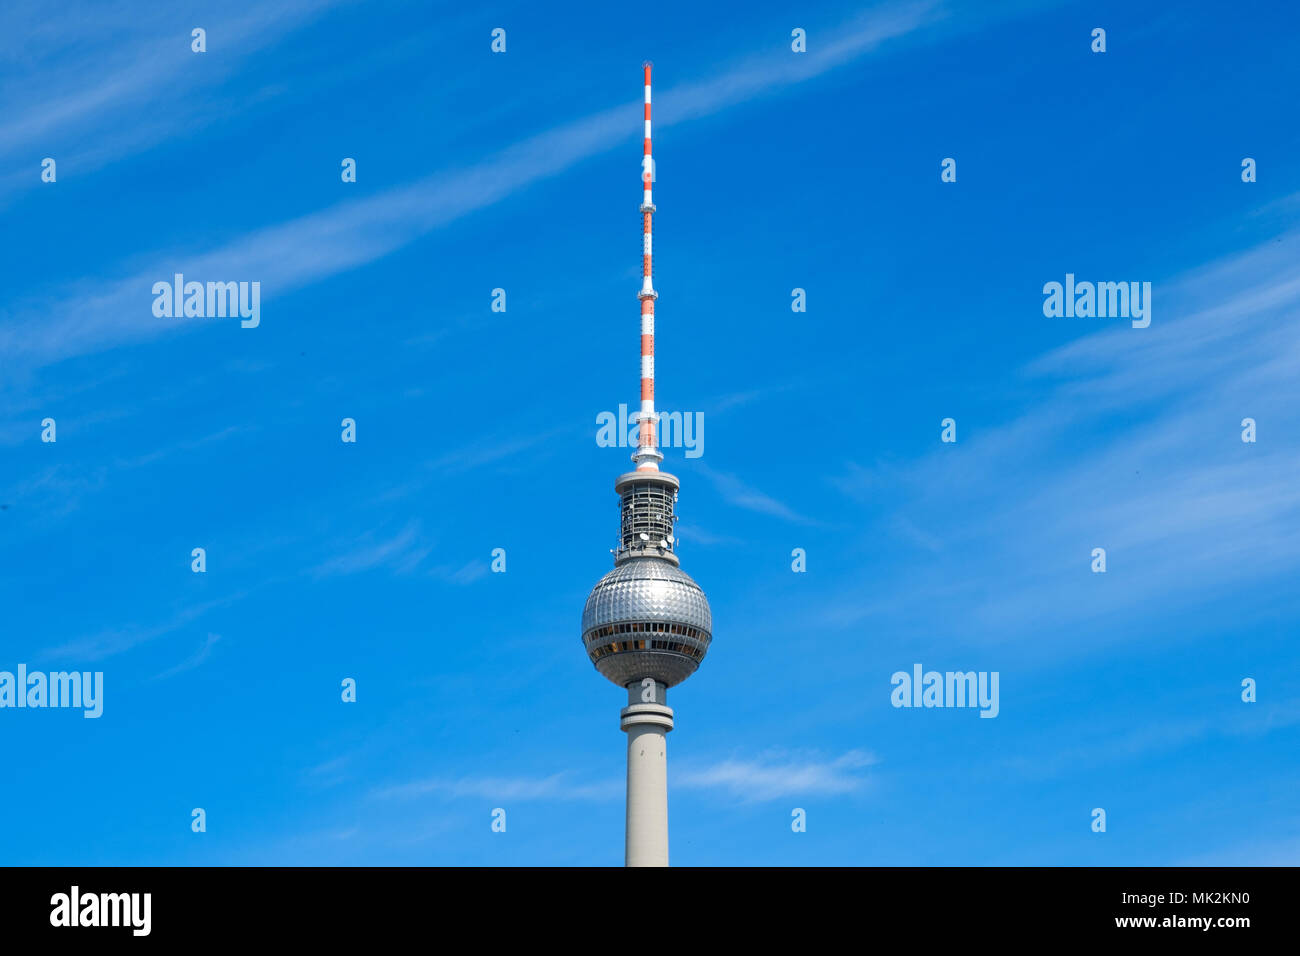 The television tower / Tv Tower (Fernsehturm), the most famous landmark in Berlin, Germany Stock Photo